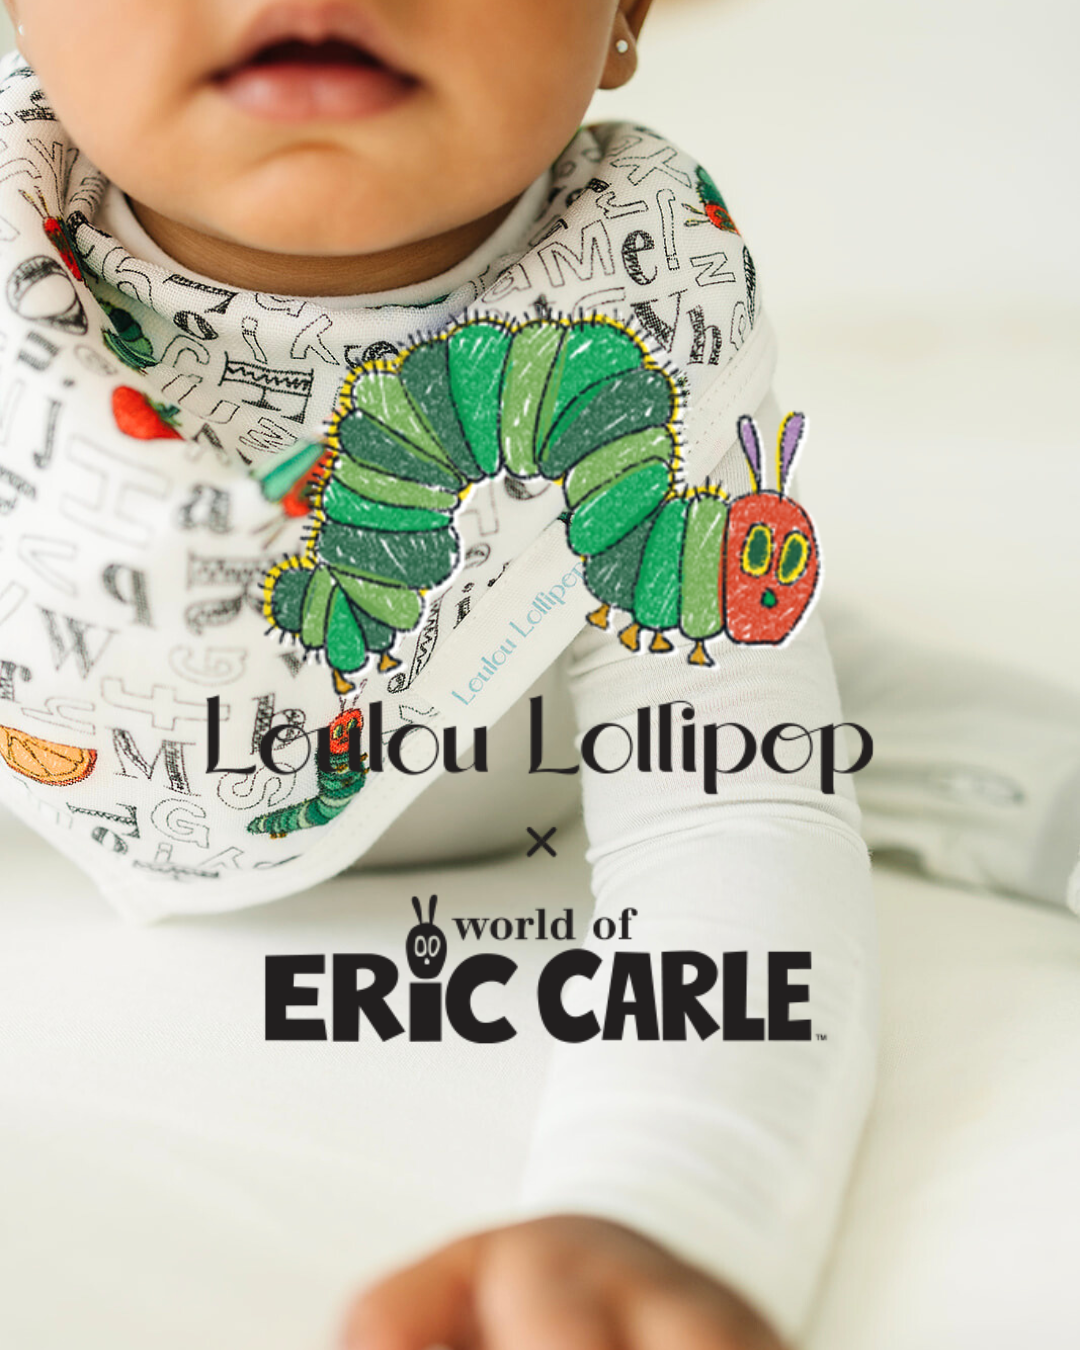 Introducing the Eric Carle Exclusive Collection by Loulou Lollipop